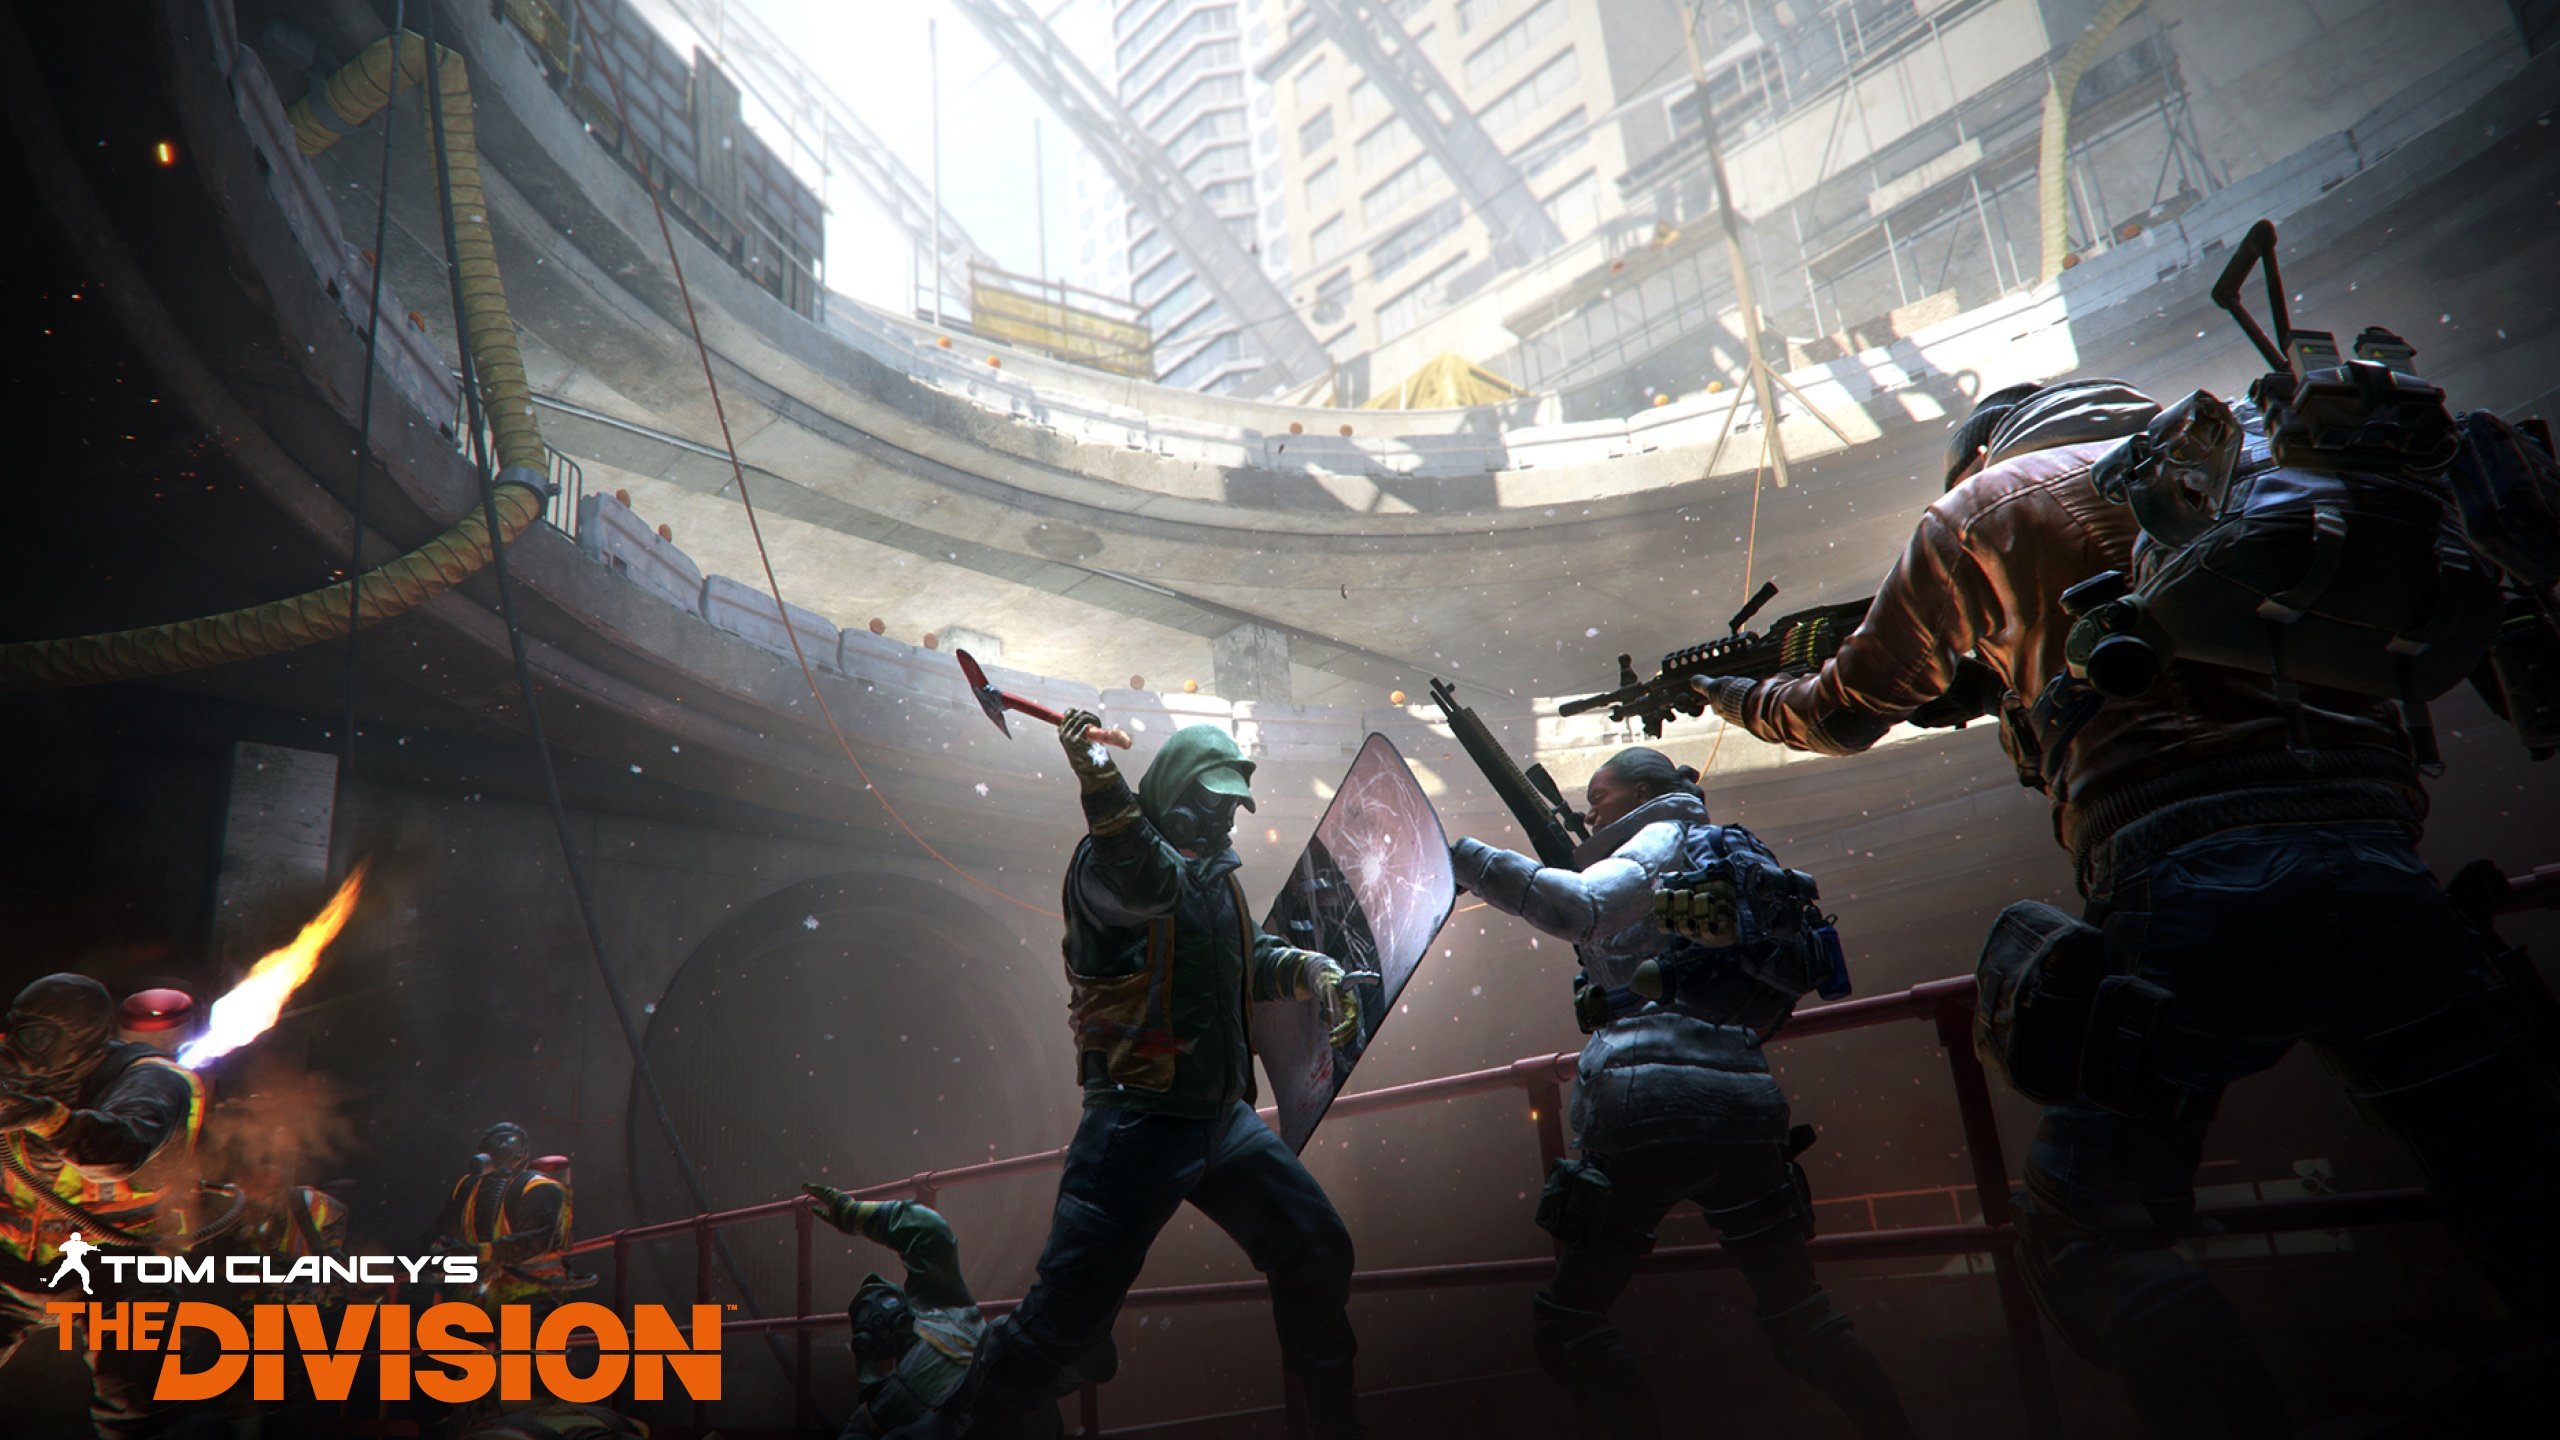 Awesome Tom Clancy's The Division free wallpaper ID:450043 for hd 2560x1440 desktop